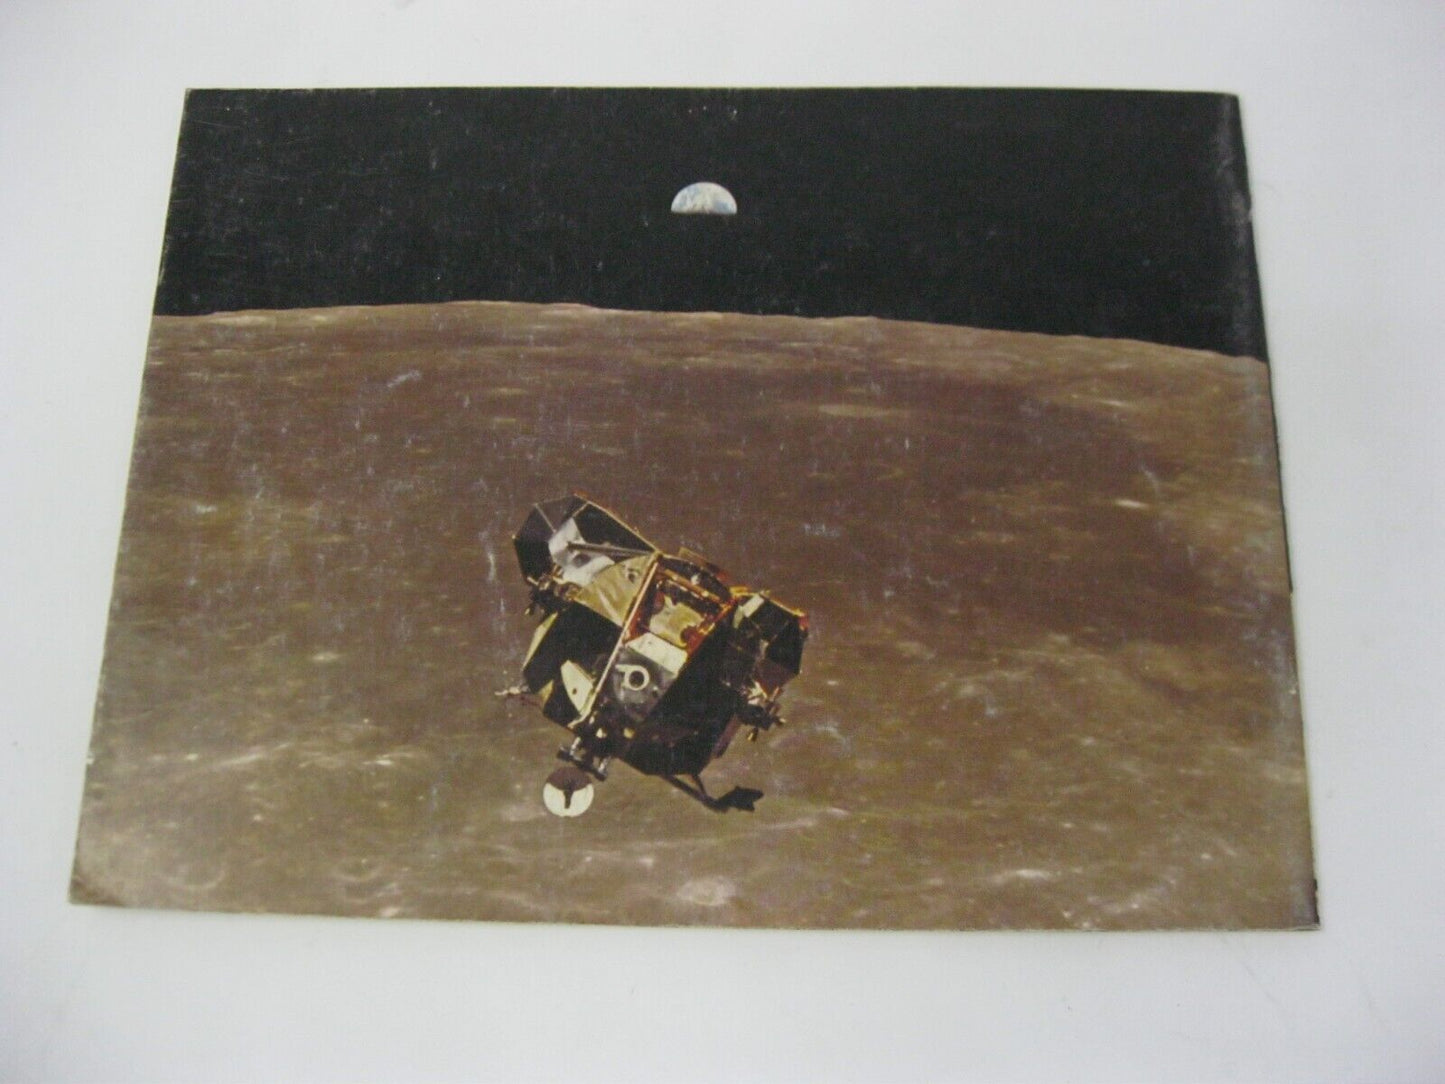 'Man on the Moon' Picture Chronology of Man in Space Exploration Collectors